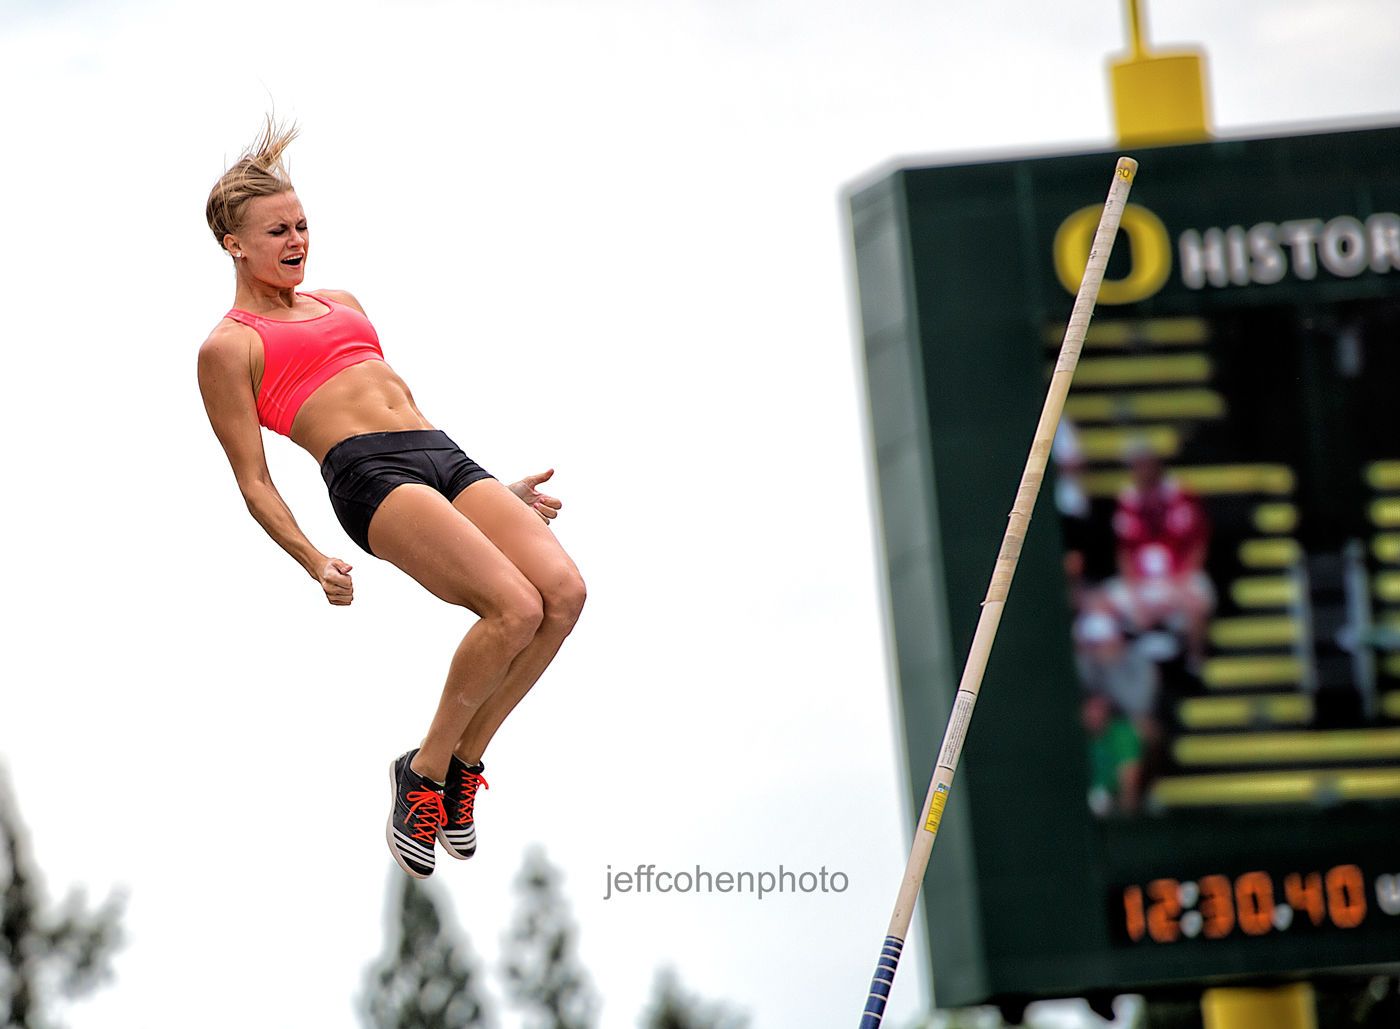 1r2015_usaoutdoors_day_4_katie_nageotte_pv_jeff_cohen_1639__web.jpg